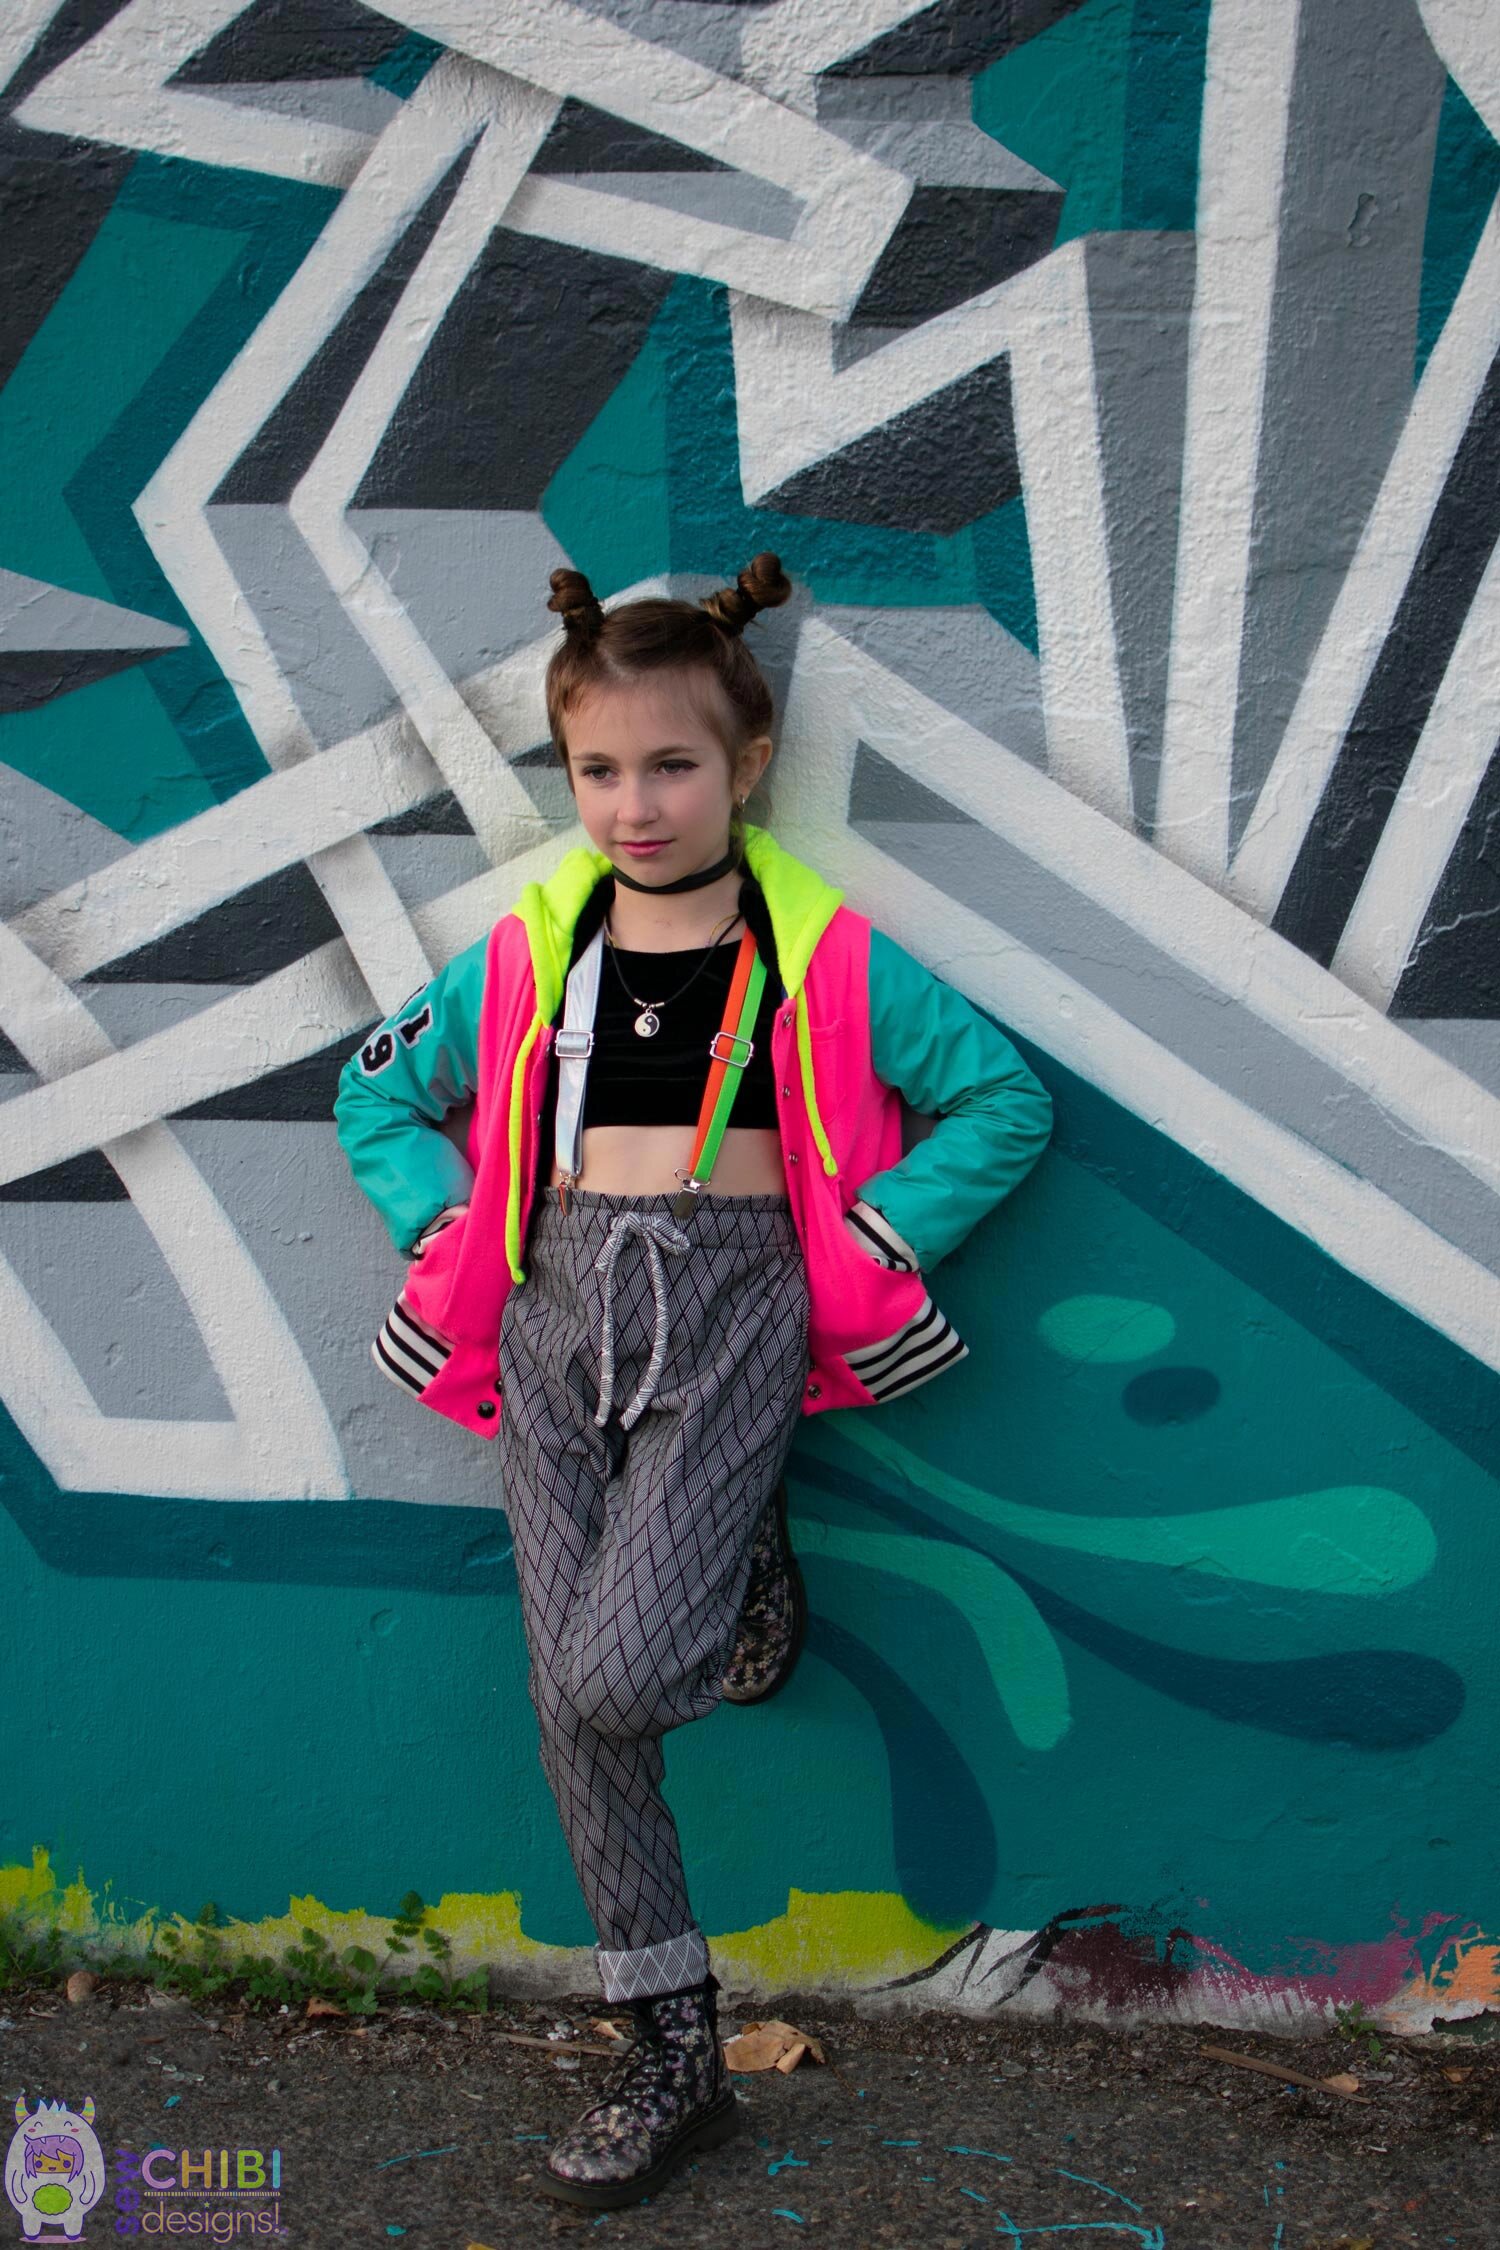  Senpai Bomber Jacket PDF Pattern by Sew Chibi Designs. Boys, Girls, Non-Binary Fashion for kids and teens ages 12M-16Y 